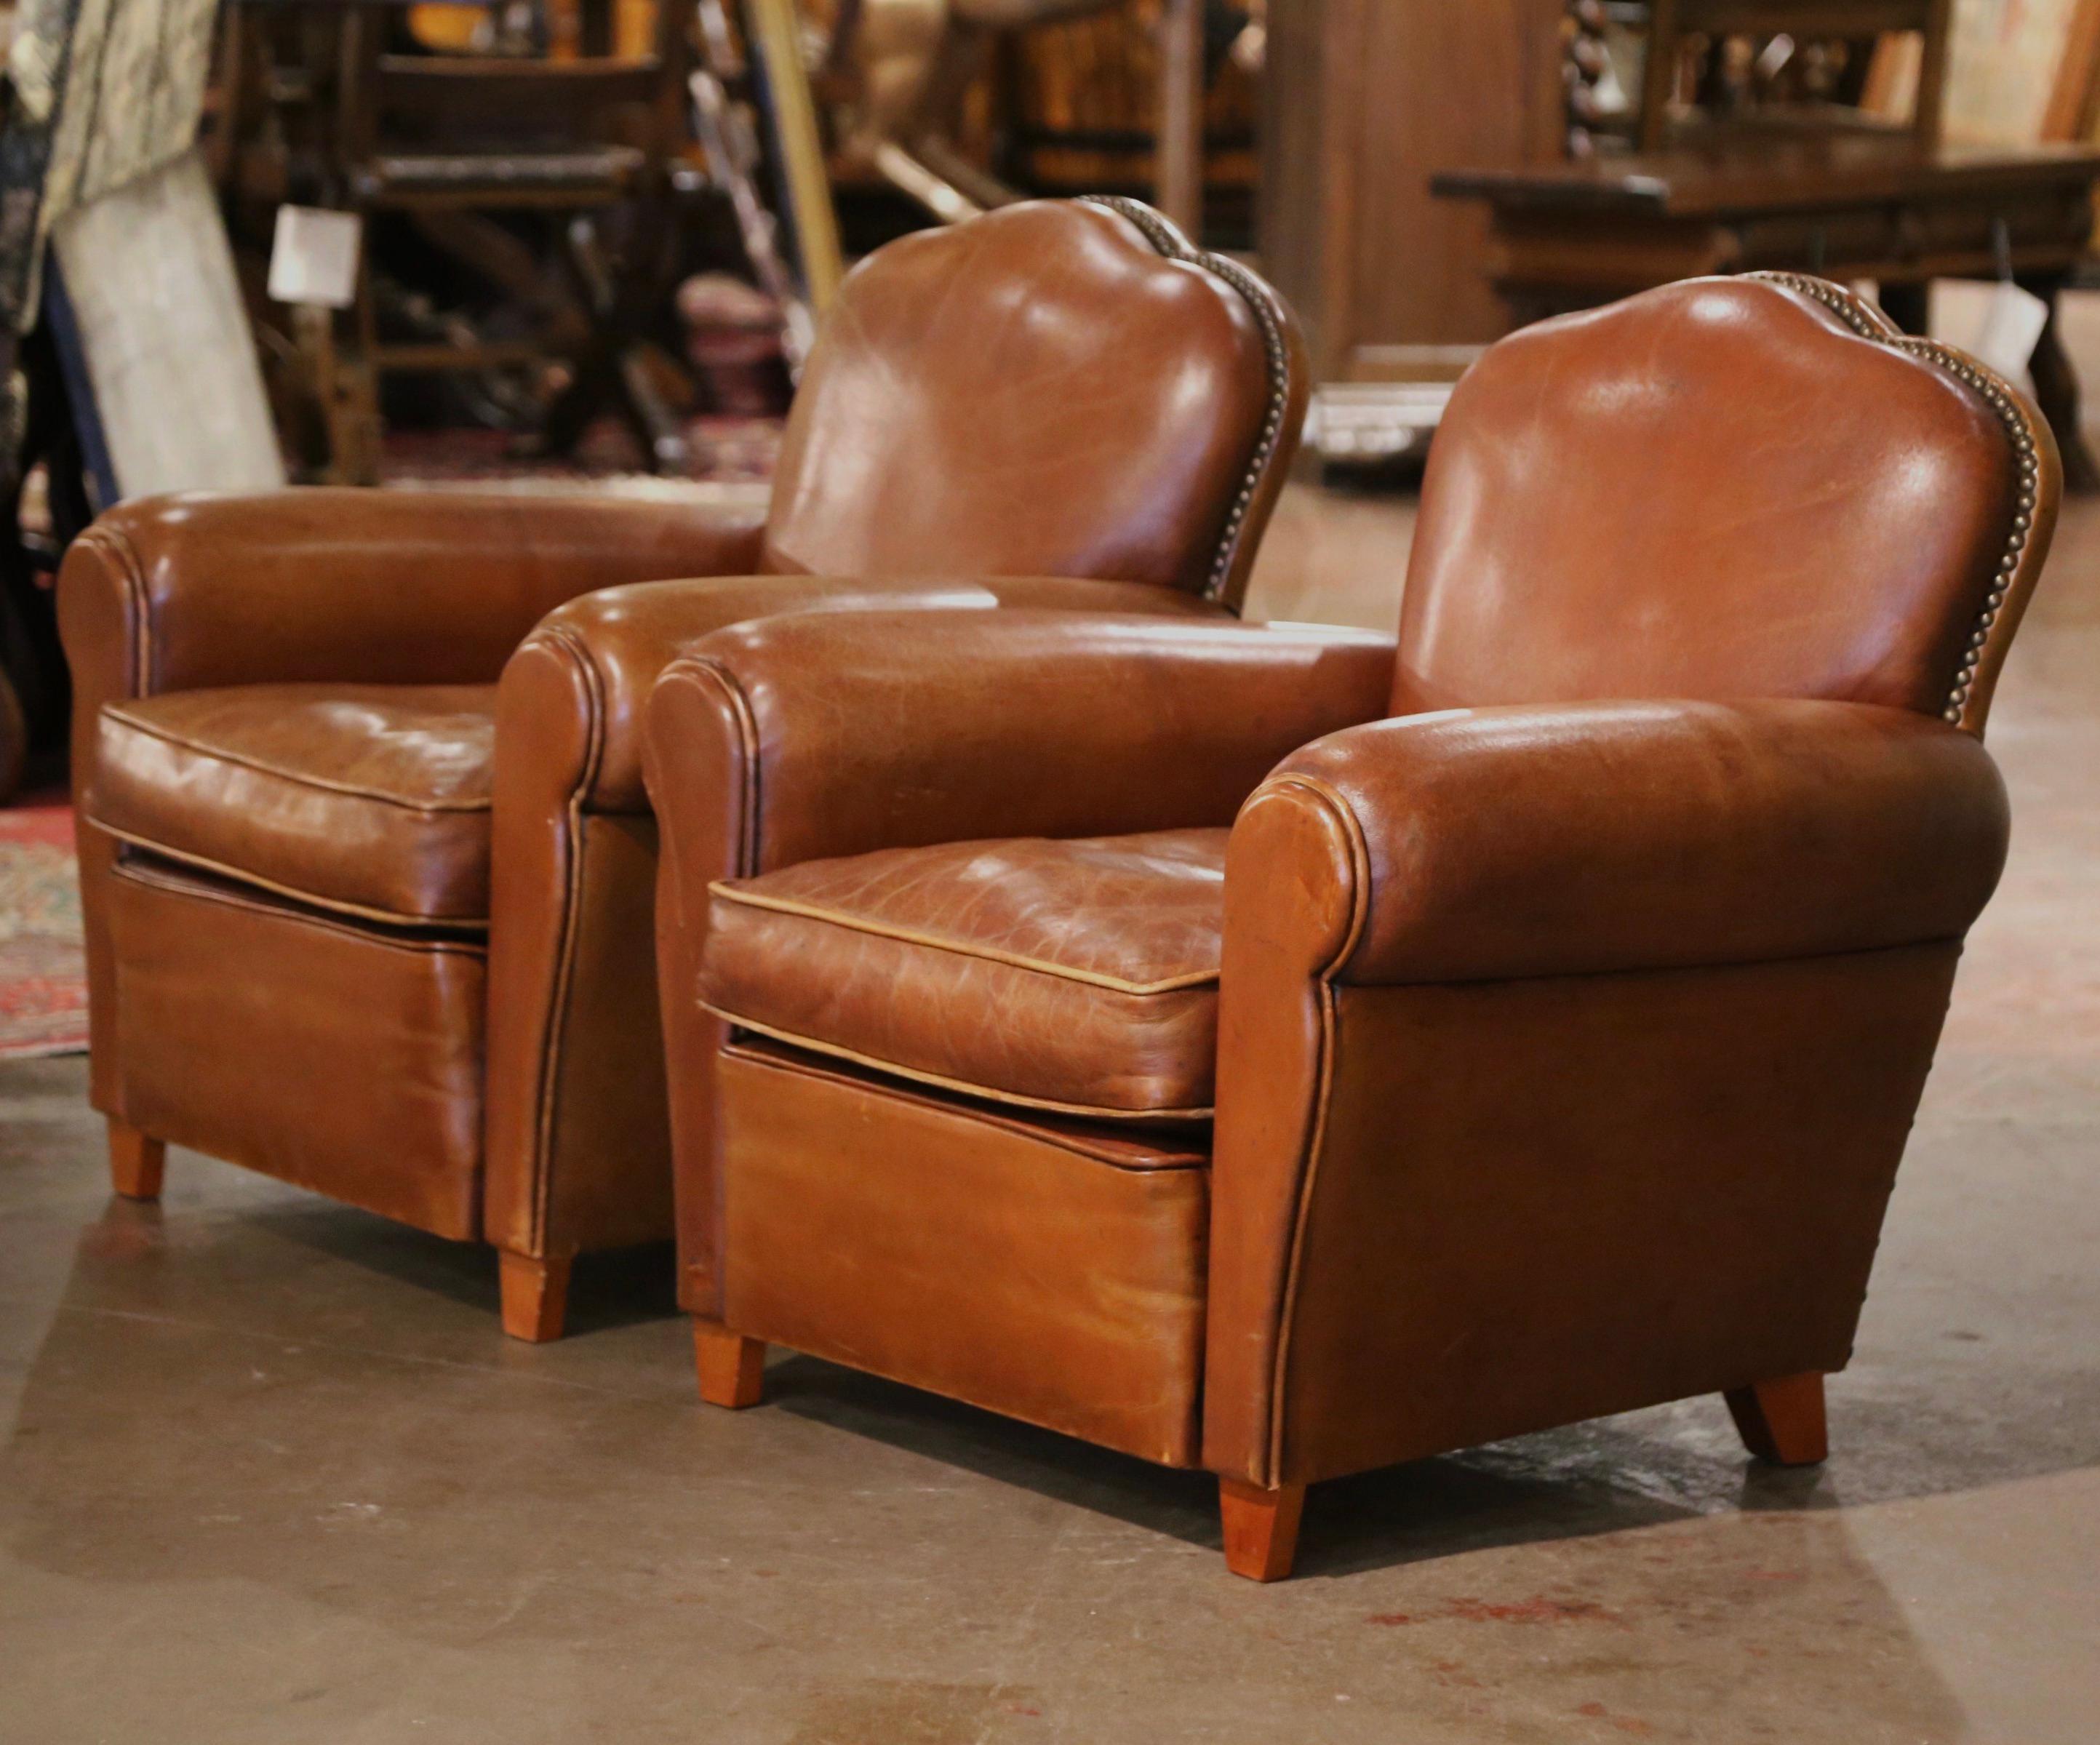 These Classic, antique Art Deco club chairs were crafted in France, circa 1970. The stately chairs feature wide, rounded armrests, a pitch back with an arched top shape, and tapered wooden feet at the base. The Classic, masculine French chairs are